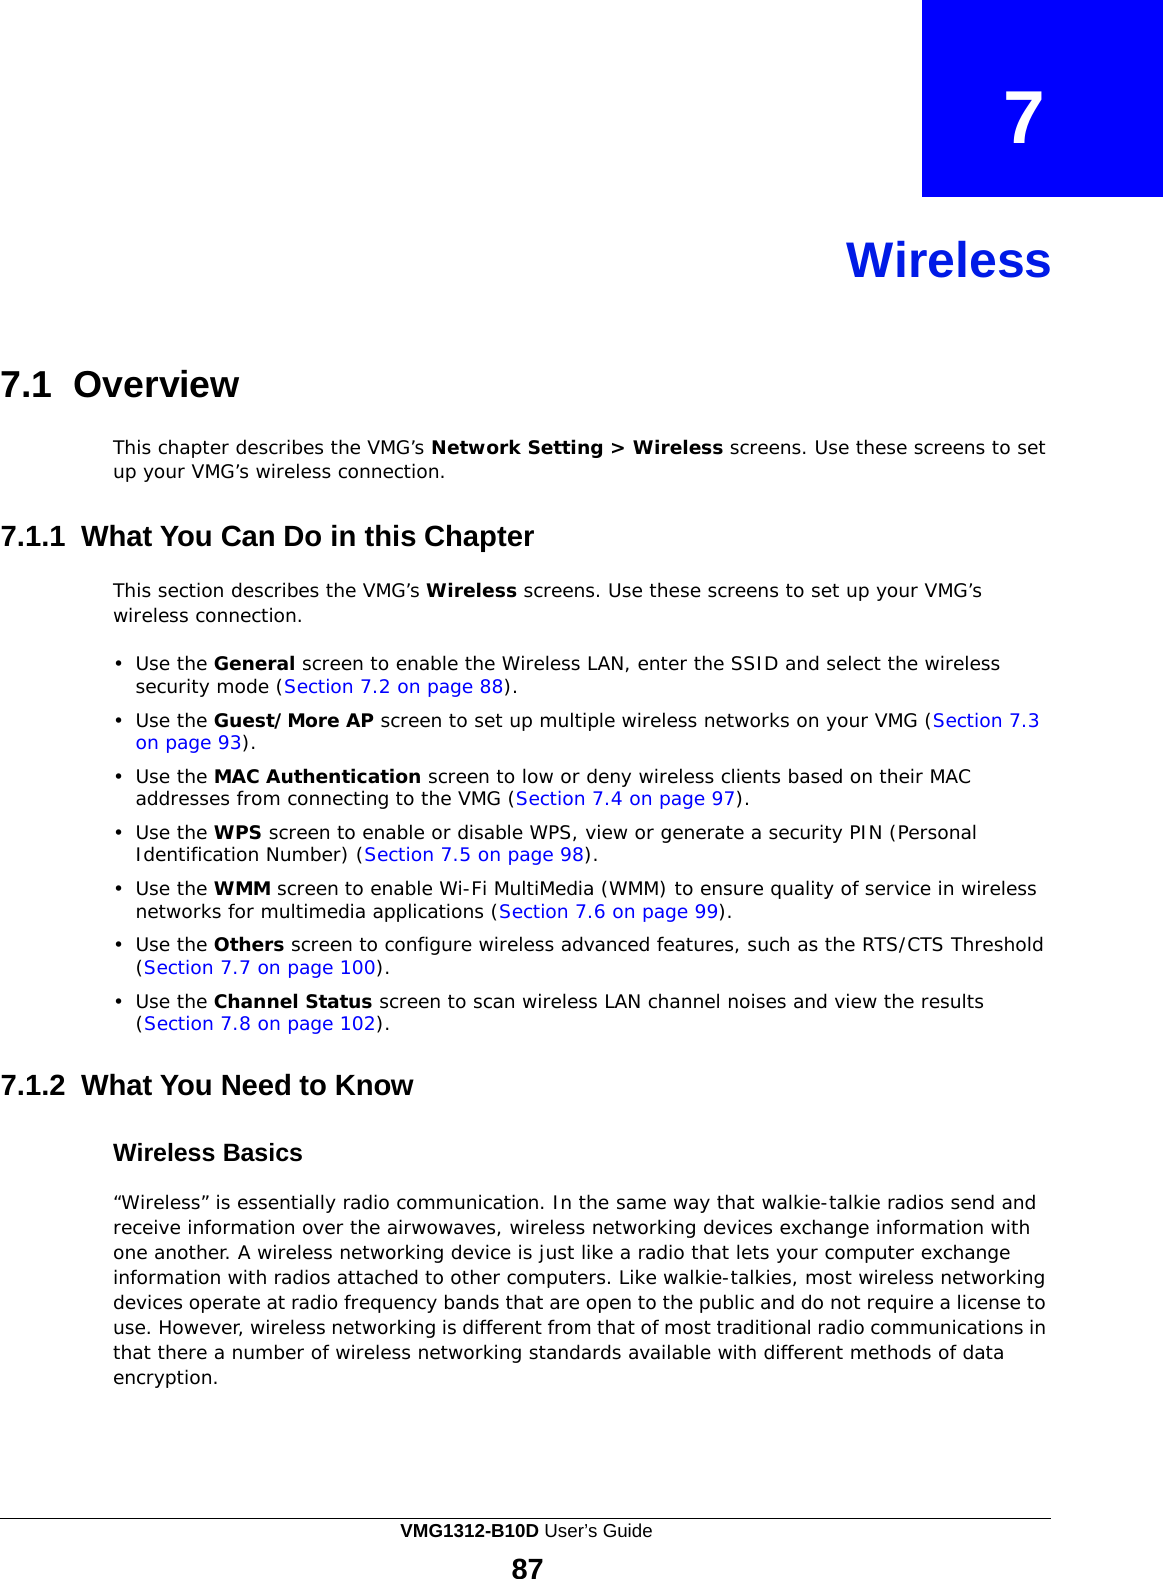  7    Wireless     7.1  Overview  This chapter describes the VMG’s Network Setting &gt; Wireless screens. Use these screens to set up your VMG’s wireless connection.   7.1.1  What You Can Do in this Chapter  This section describes the VMG’s Wireless screens. Use these screens to set up your VMG’s wireless connection.  •  Use the General screen to enable the Wireless LAN, enter the SSID and select the wireless security mode (Section 7.2 on page 88).  •  Use the Guest/More AP screen to set up multiple wireless networks on your VMG (Section 7.3 on page 93).  •  Use the MAC Authentication screen to low or deny wireless clients based on their MAC addresses from connecting to the VMG (Section 7.4 on page 97).  •  Use the WPS screen to enable or disable WPS, view or generate a security PIN (Personal Identification Number) (Section 7.5 on page 98).  •  Use the WMM screen to enable Wi-Fi MultiMedia (WMM) to ensure quality of service in wireless networks for multimedia applications (Section 7.6 on page 99).  •  Use the Others screen to configure wireless advanced features, such as the RTS/CTS Threshold (Section 7.7 on page 100).  •  Use the Channel Status screen to scan wireless LAN channel noises and view the results (Section 7.8 on page 102).   7.1.2 What You Need to Know   Wireless Basics  “Wireless” is essentially radio communication. In the same way that walkie-talkie radios send and receive information over the airwowaves, wireless networking devices exchange information with one another. A wireless networking device is just like a radio that lets your computer exchange information with radios attached to other computers. Like walkie-talkies, most wireless networking devices operate at radio frequency bands that are open to the public and do not require a license to use. However, wireless networking is different from that of most traditional radio communications in that there a number of wireless networking standards available with different methods of data encryption. VMG1312-B10D User’s Guide 87  